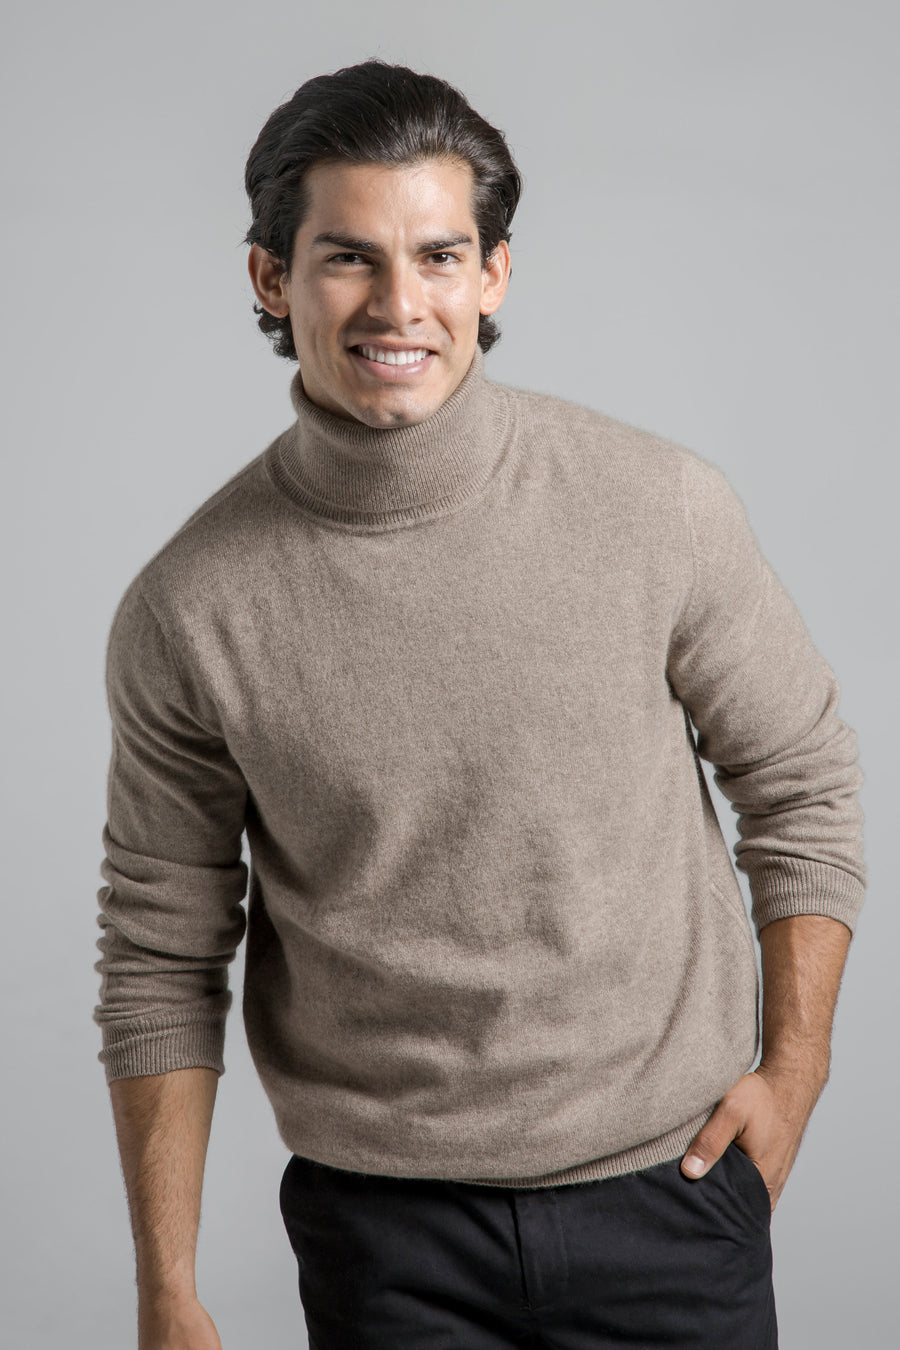 pine cashmere mens classic 100% pure organic cashmere turtleneck sweater in brown